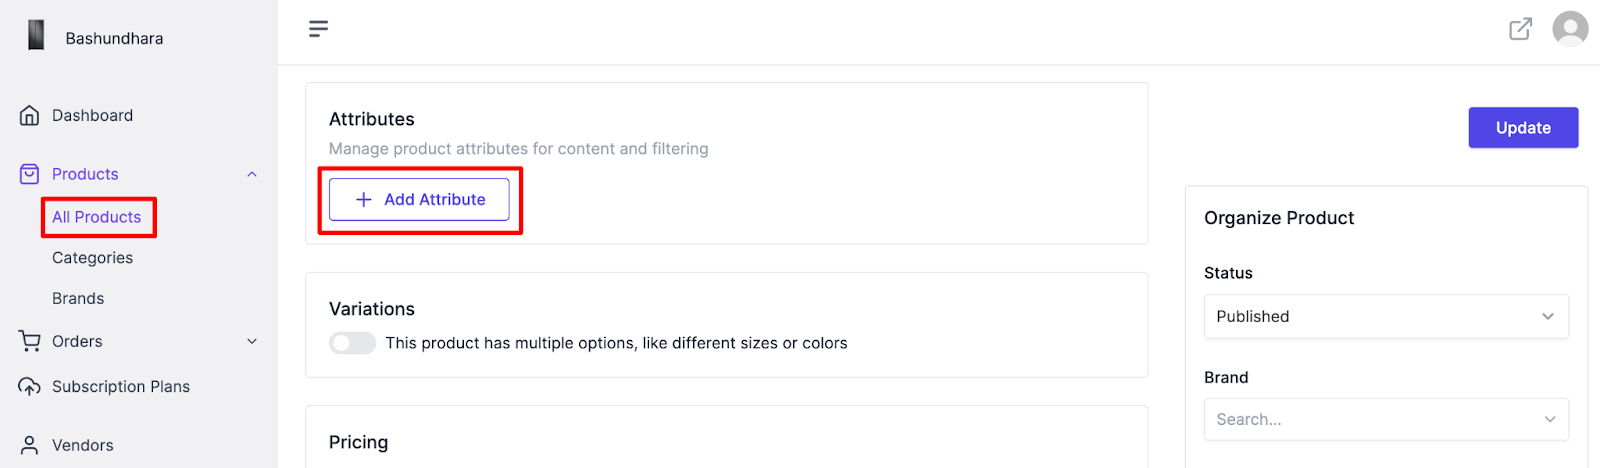 A screenshot to add attributes to your product